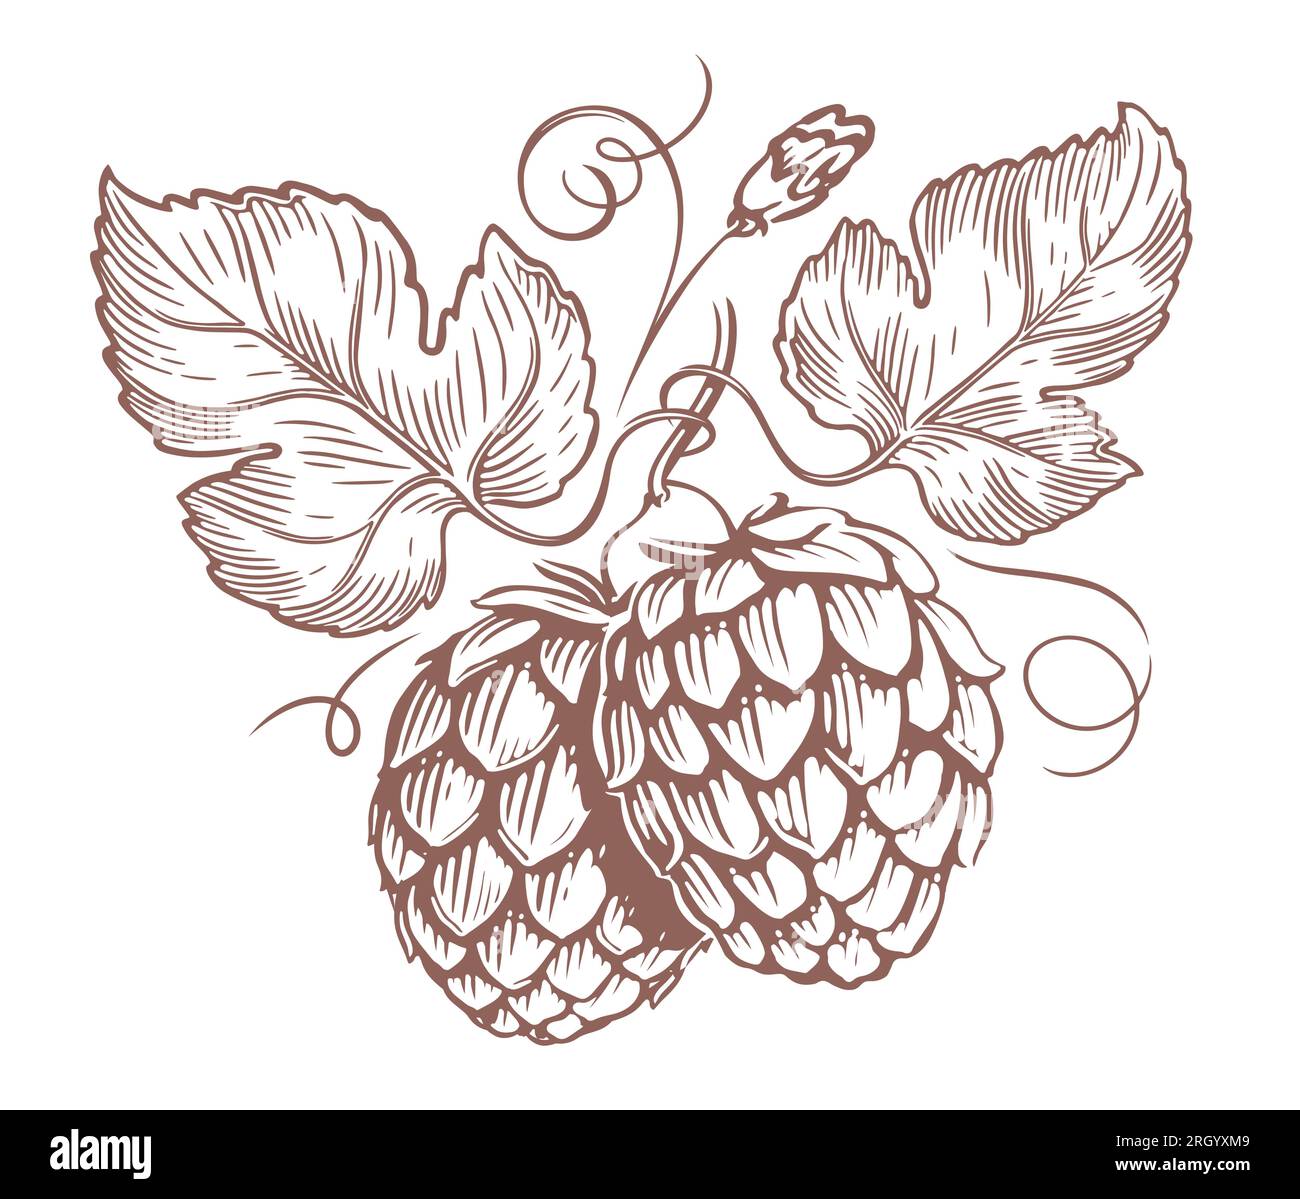 Branch with hop cones and leaves. Engraved style illustration. Vintage sketch vector illustration Stock Vector